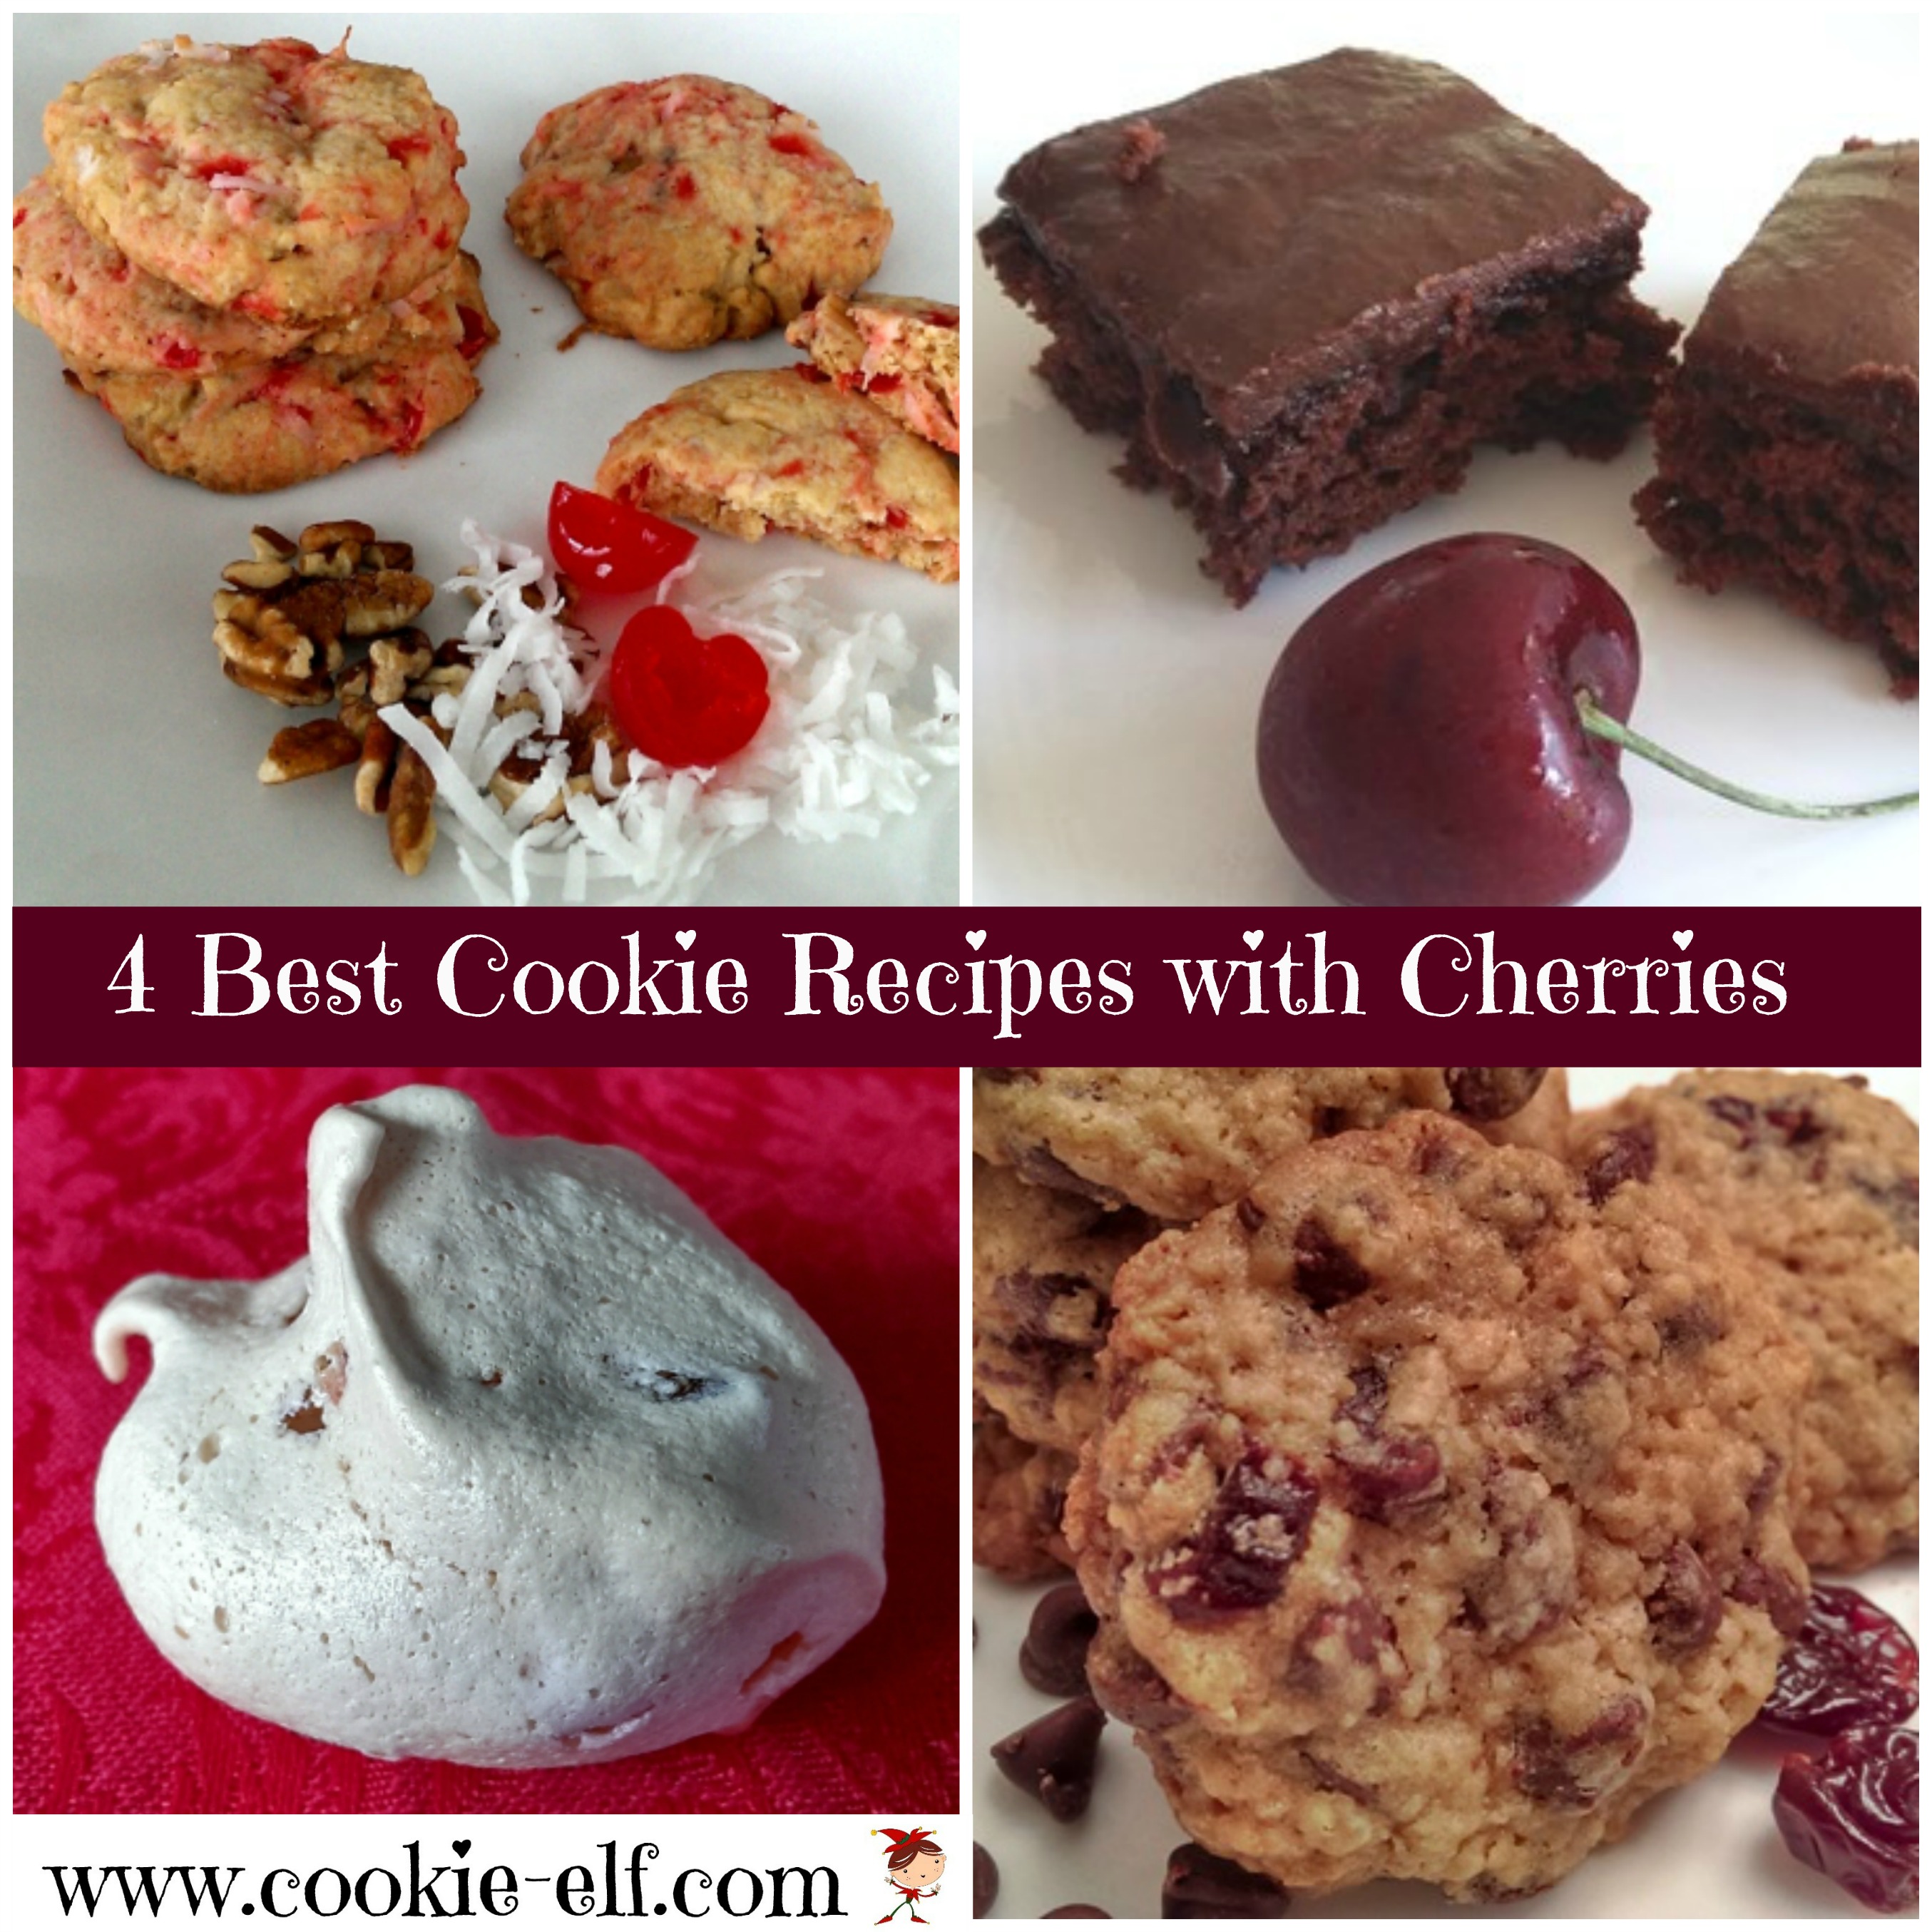 4 Best Cookie Recipes with Cherries